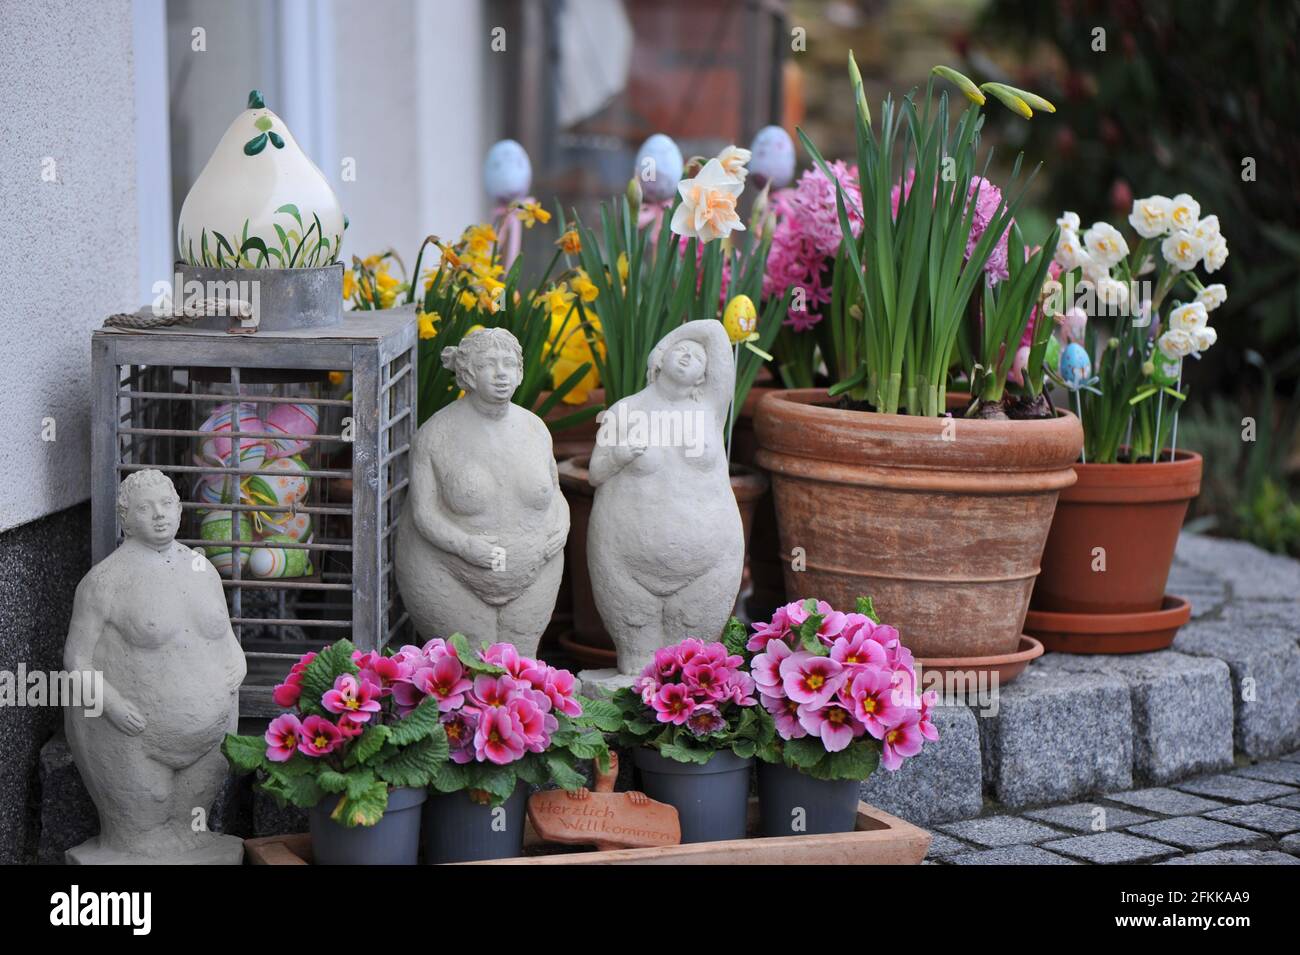 House entrance garden decoration with spring flowers: primroses, hyacinths and daffodils Stock Photo